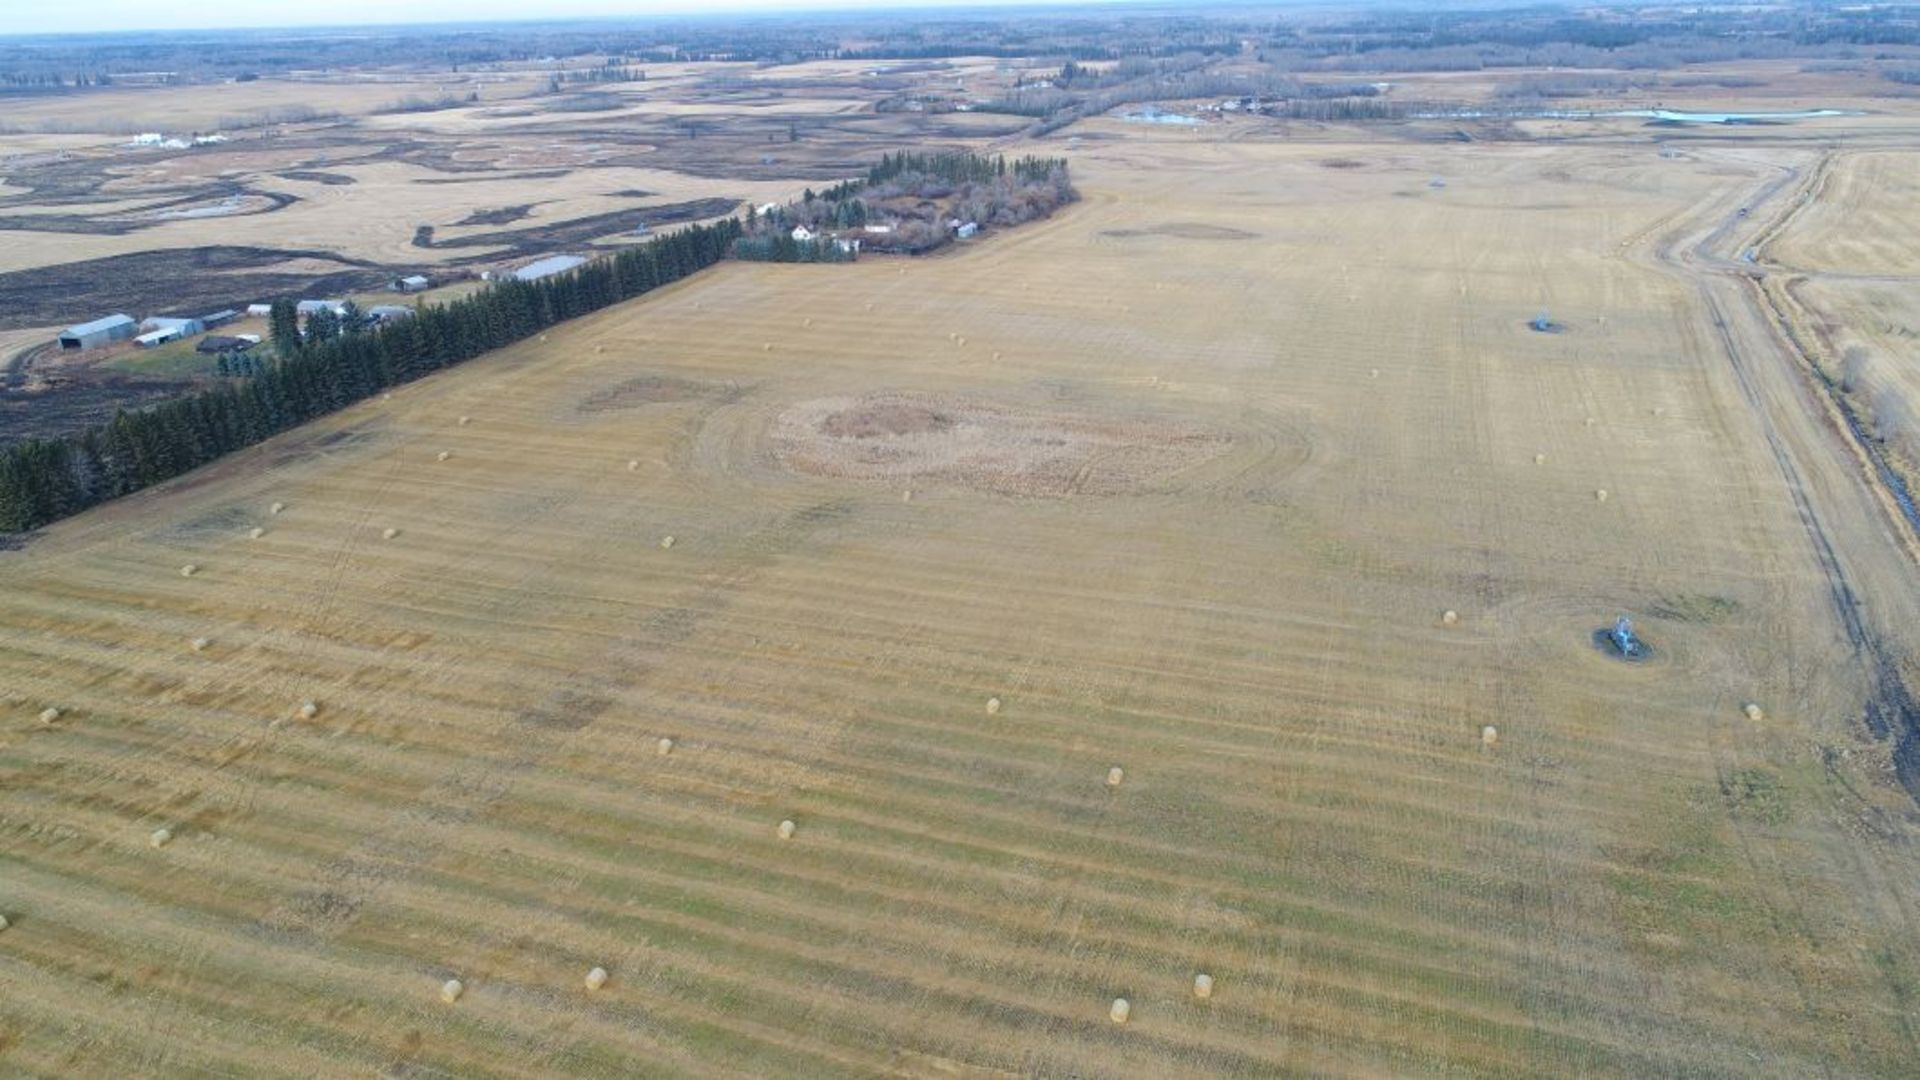 160+/- Total Acres NW 8-56-20-W4, Bruderheim, AB, consisting of Crop Land, Surface Lease & Yard Site - Image 11 of 34